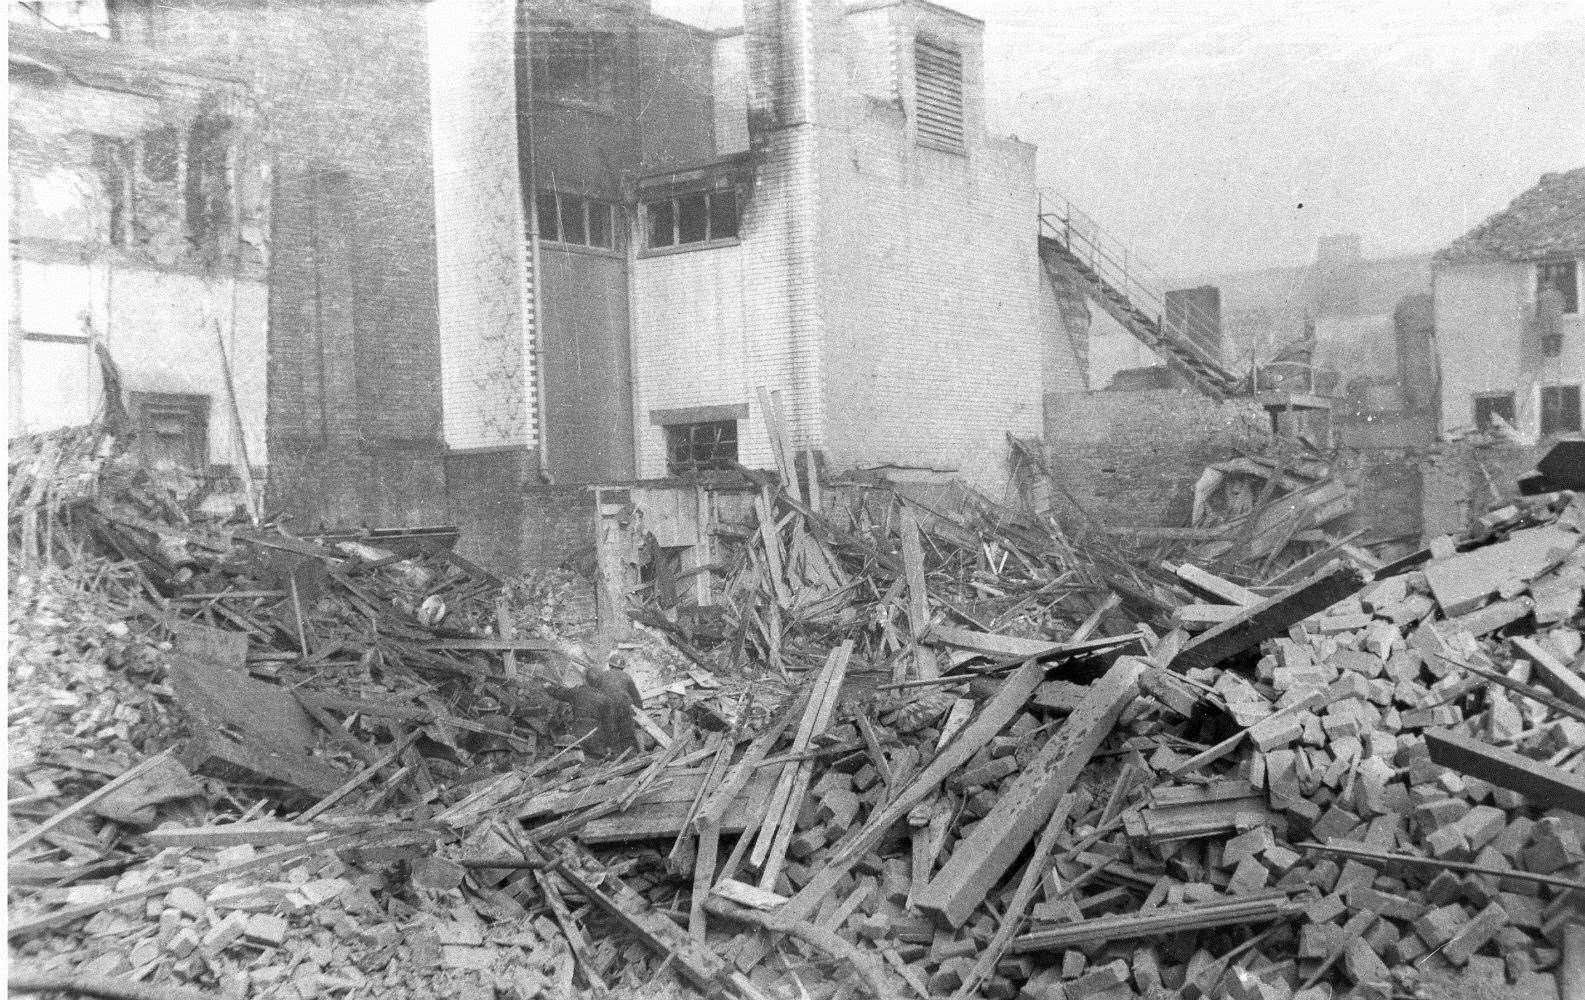 Service personnel try to find survivors in the debris that once was Dashwood's toy shop. Behind is the partially gutted remains of the Co-op store after the June 1942 Blitz of Canterbury. Both properties were in Lower Bridge Street. Picture: Paul Crampton